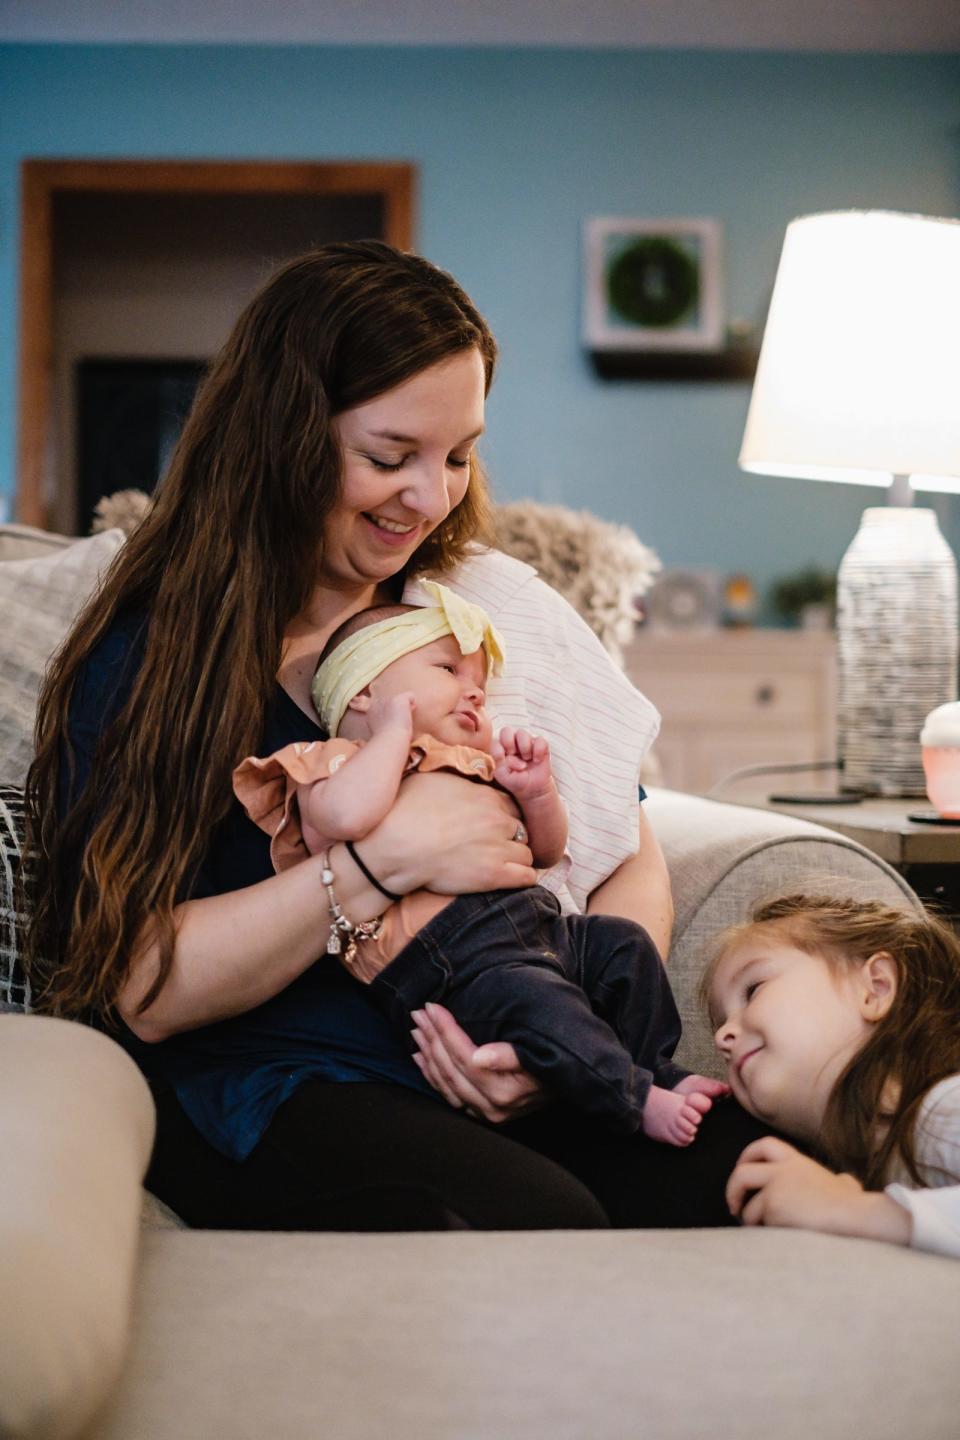 Alyssa Bostic holds 1-month-old daughter, Emryn, while 3-year-old Regan nuzzles her sister on Wednesday in the family's New Philadelphia home.